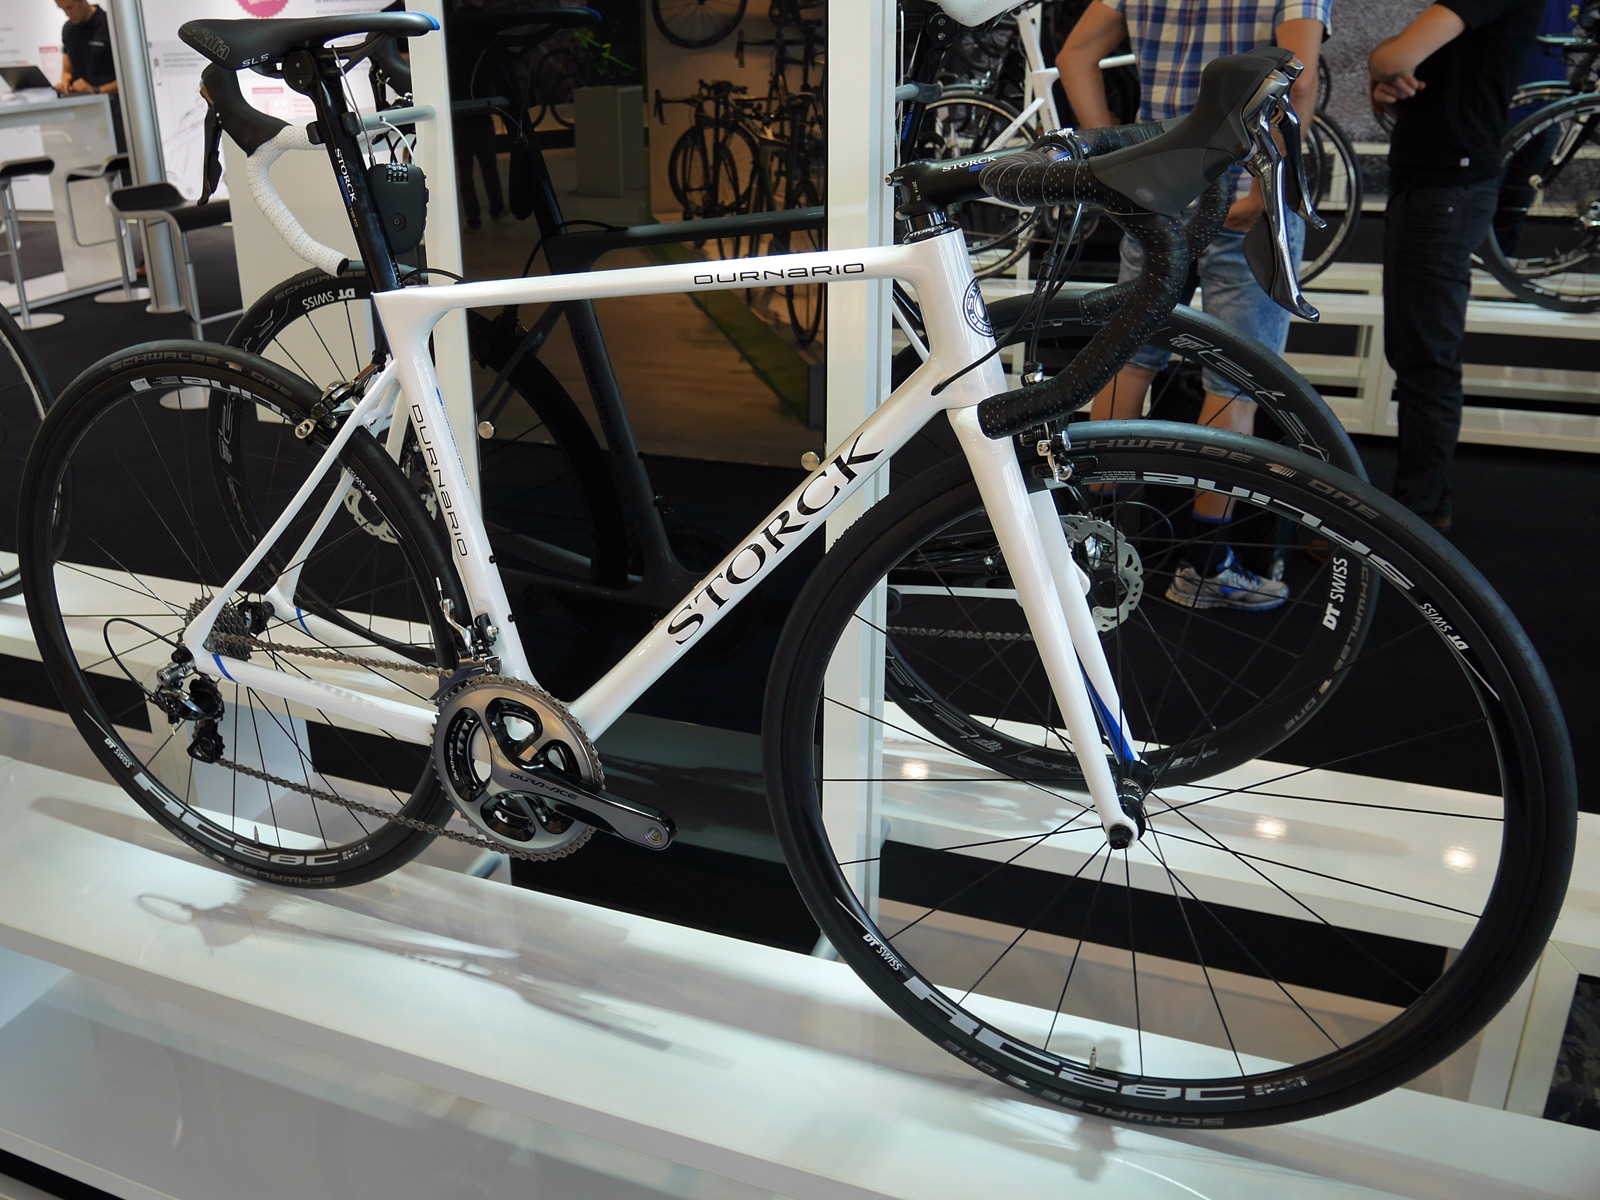 EB15: Storck Durnario Goes All-Road; and Every Bike Gets New Comp, Pro & Platinum Layup Options